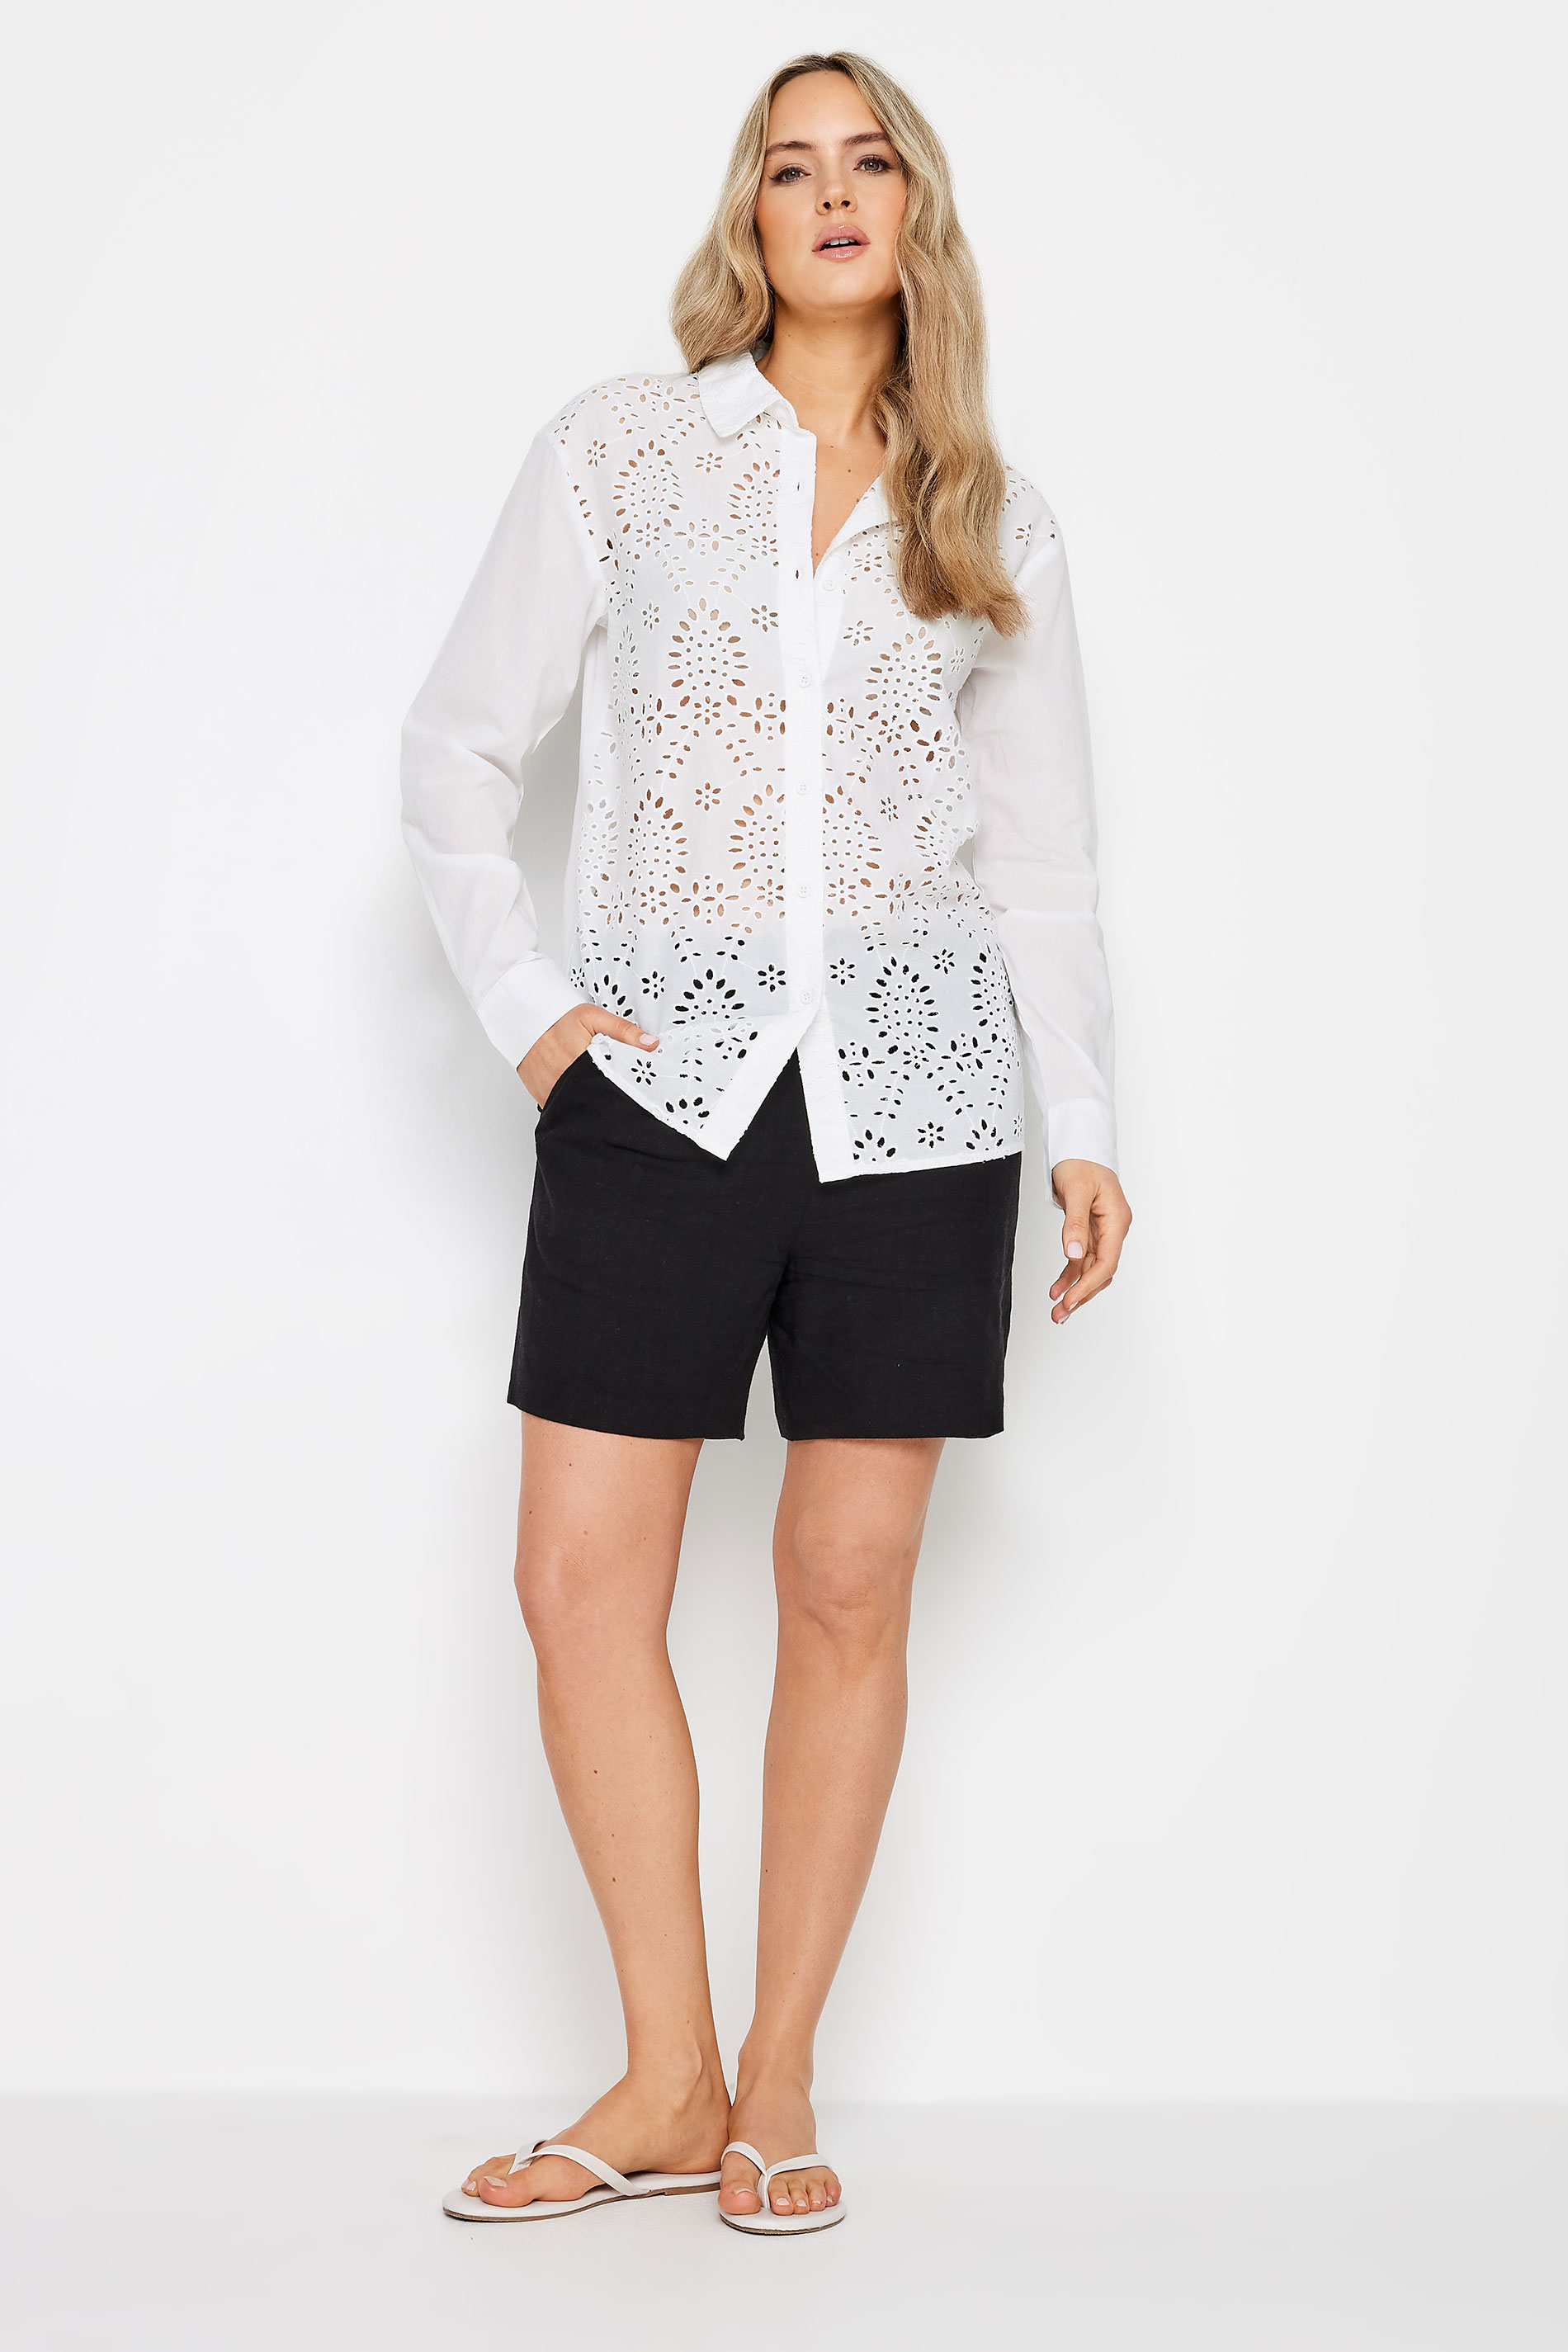 LTS Tall Womens White Broderie Anglaise Front Shirt | Long Tall Sally 3